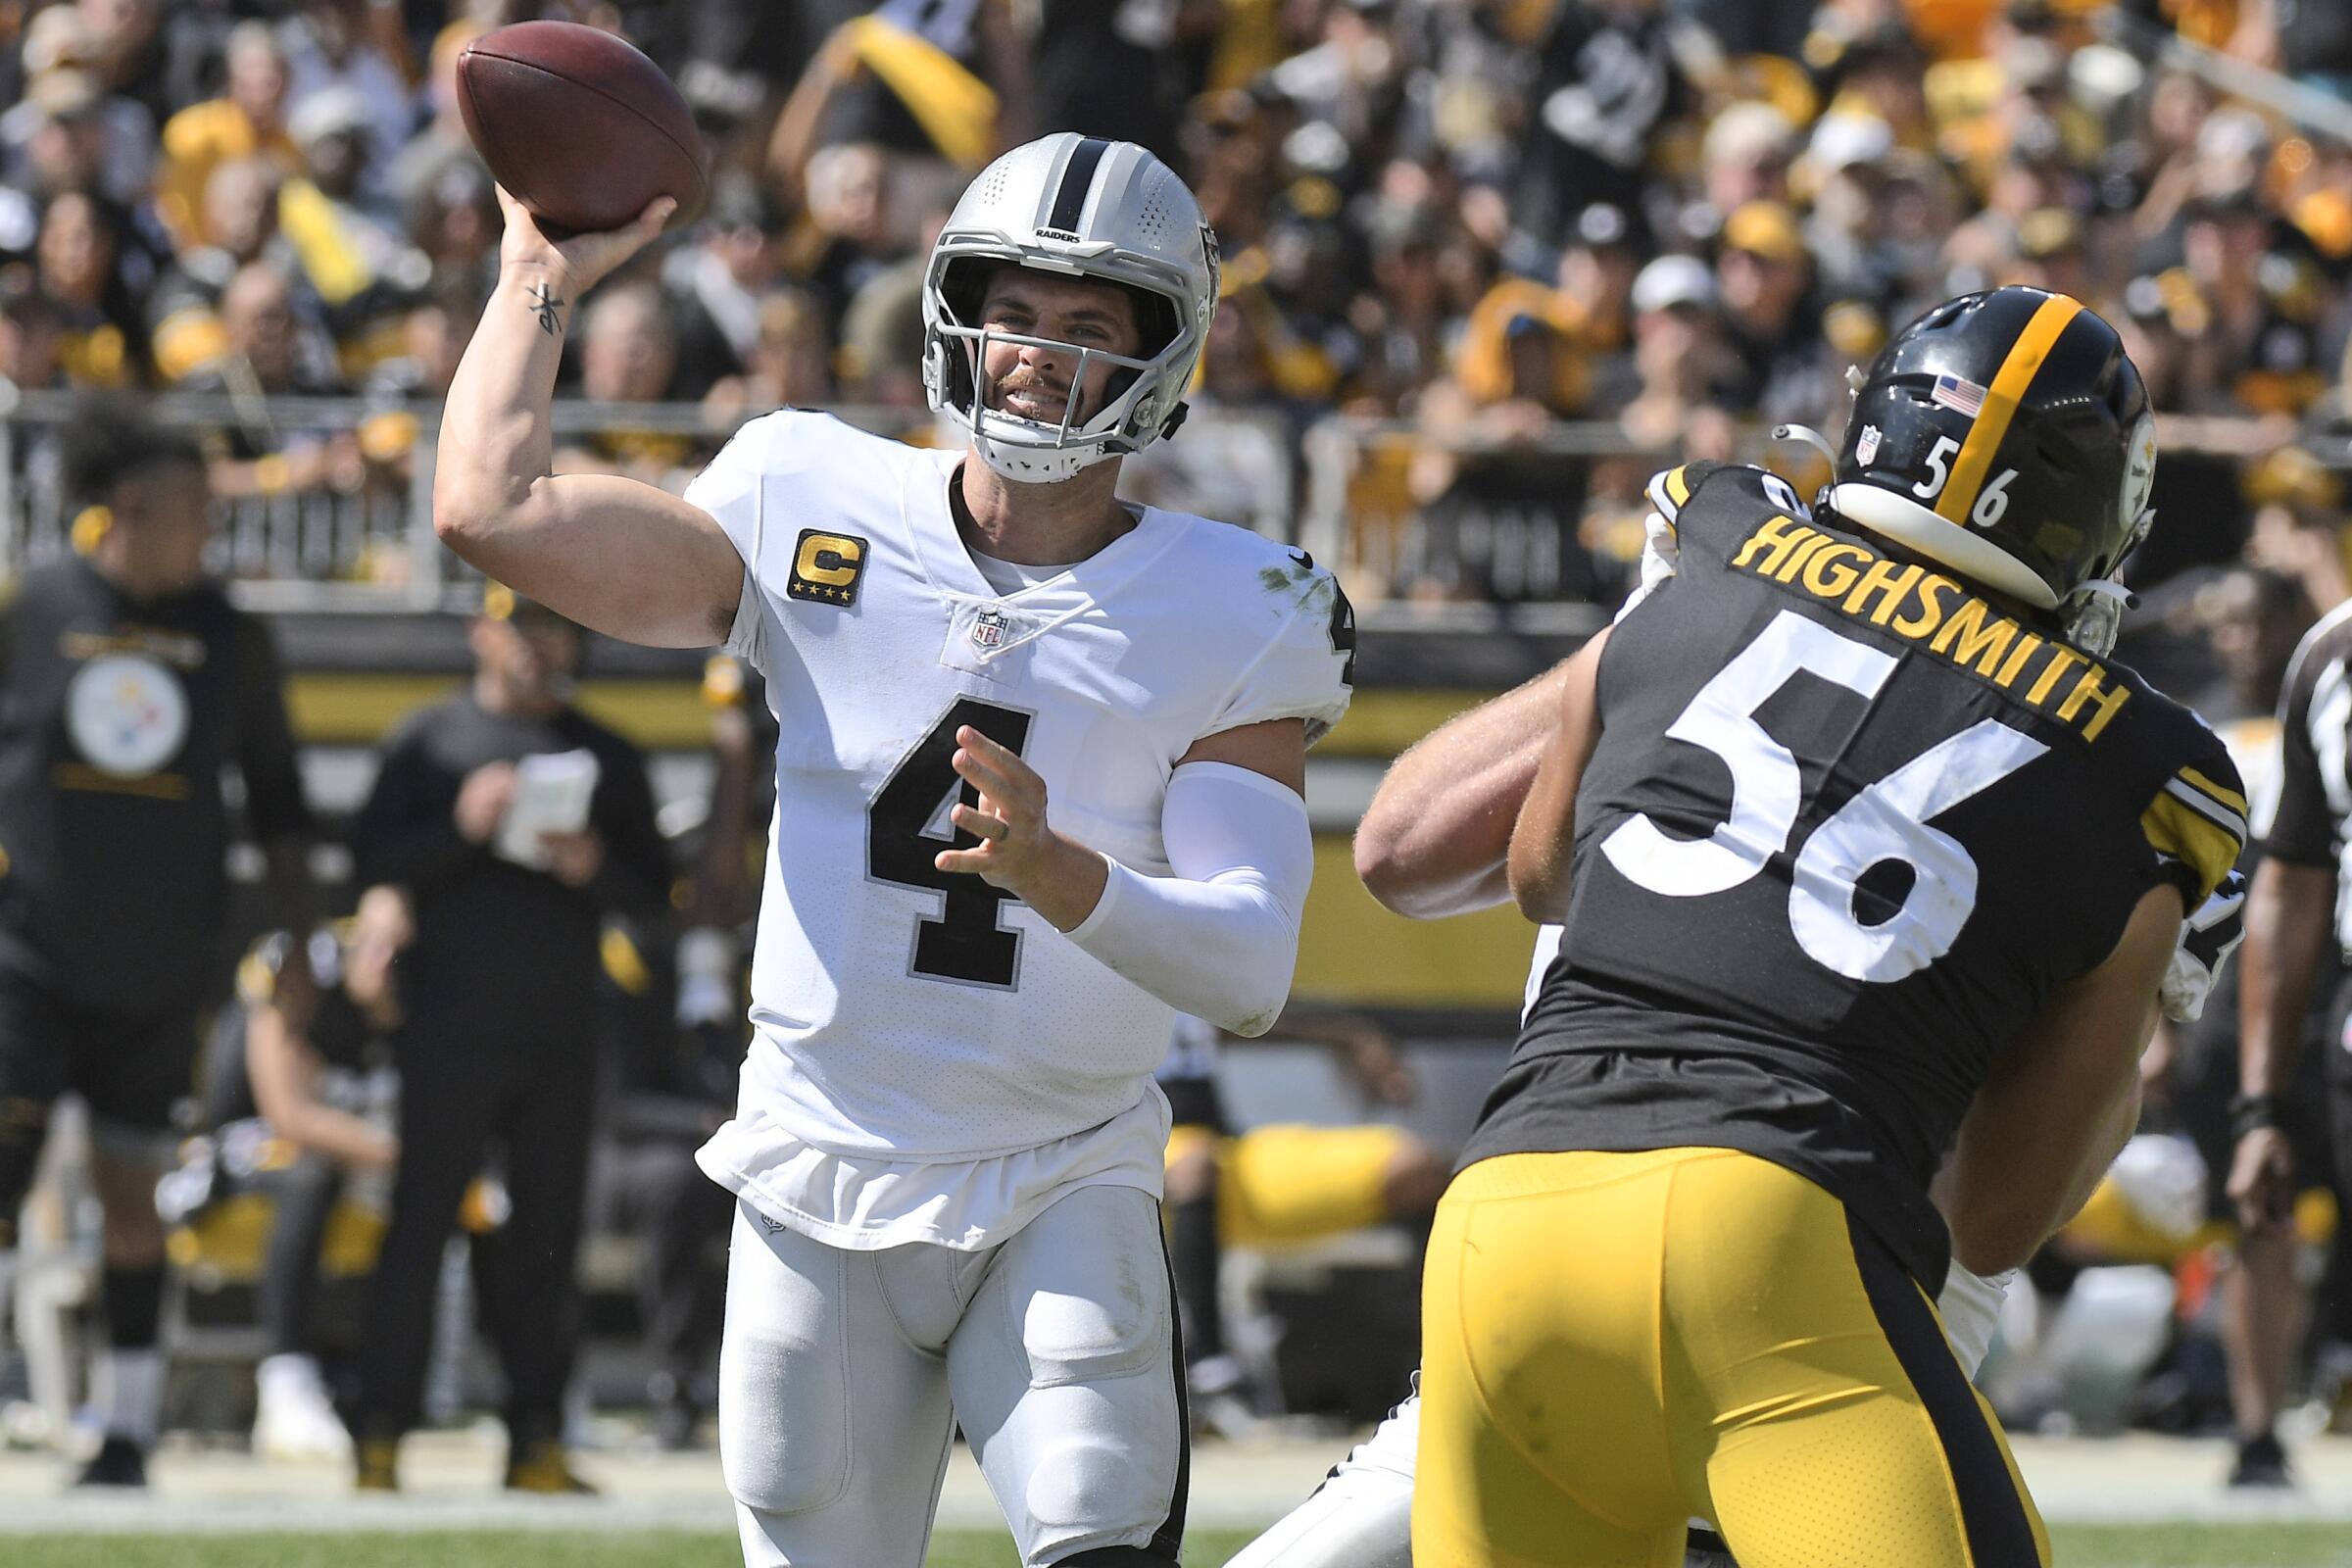 Leaving Las Vegas with a victory after Steelers 'D' turns Raiders back late